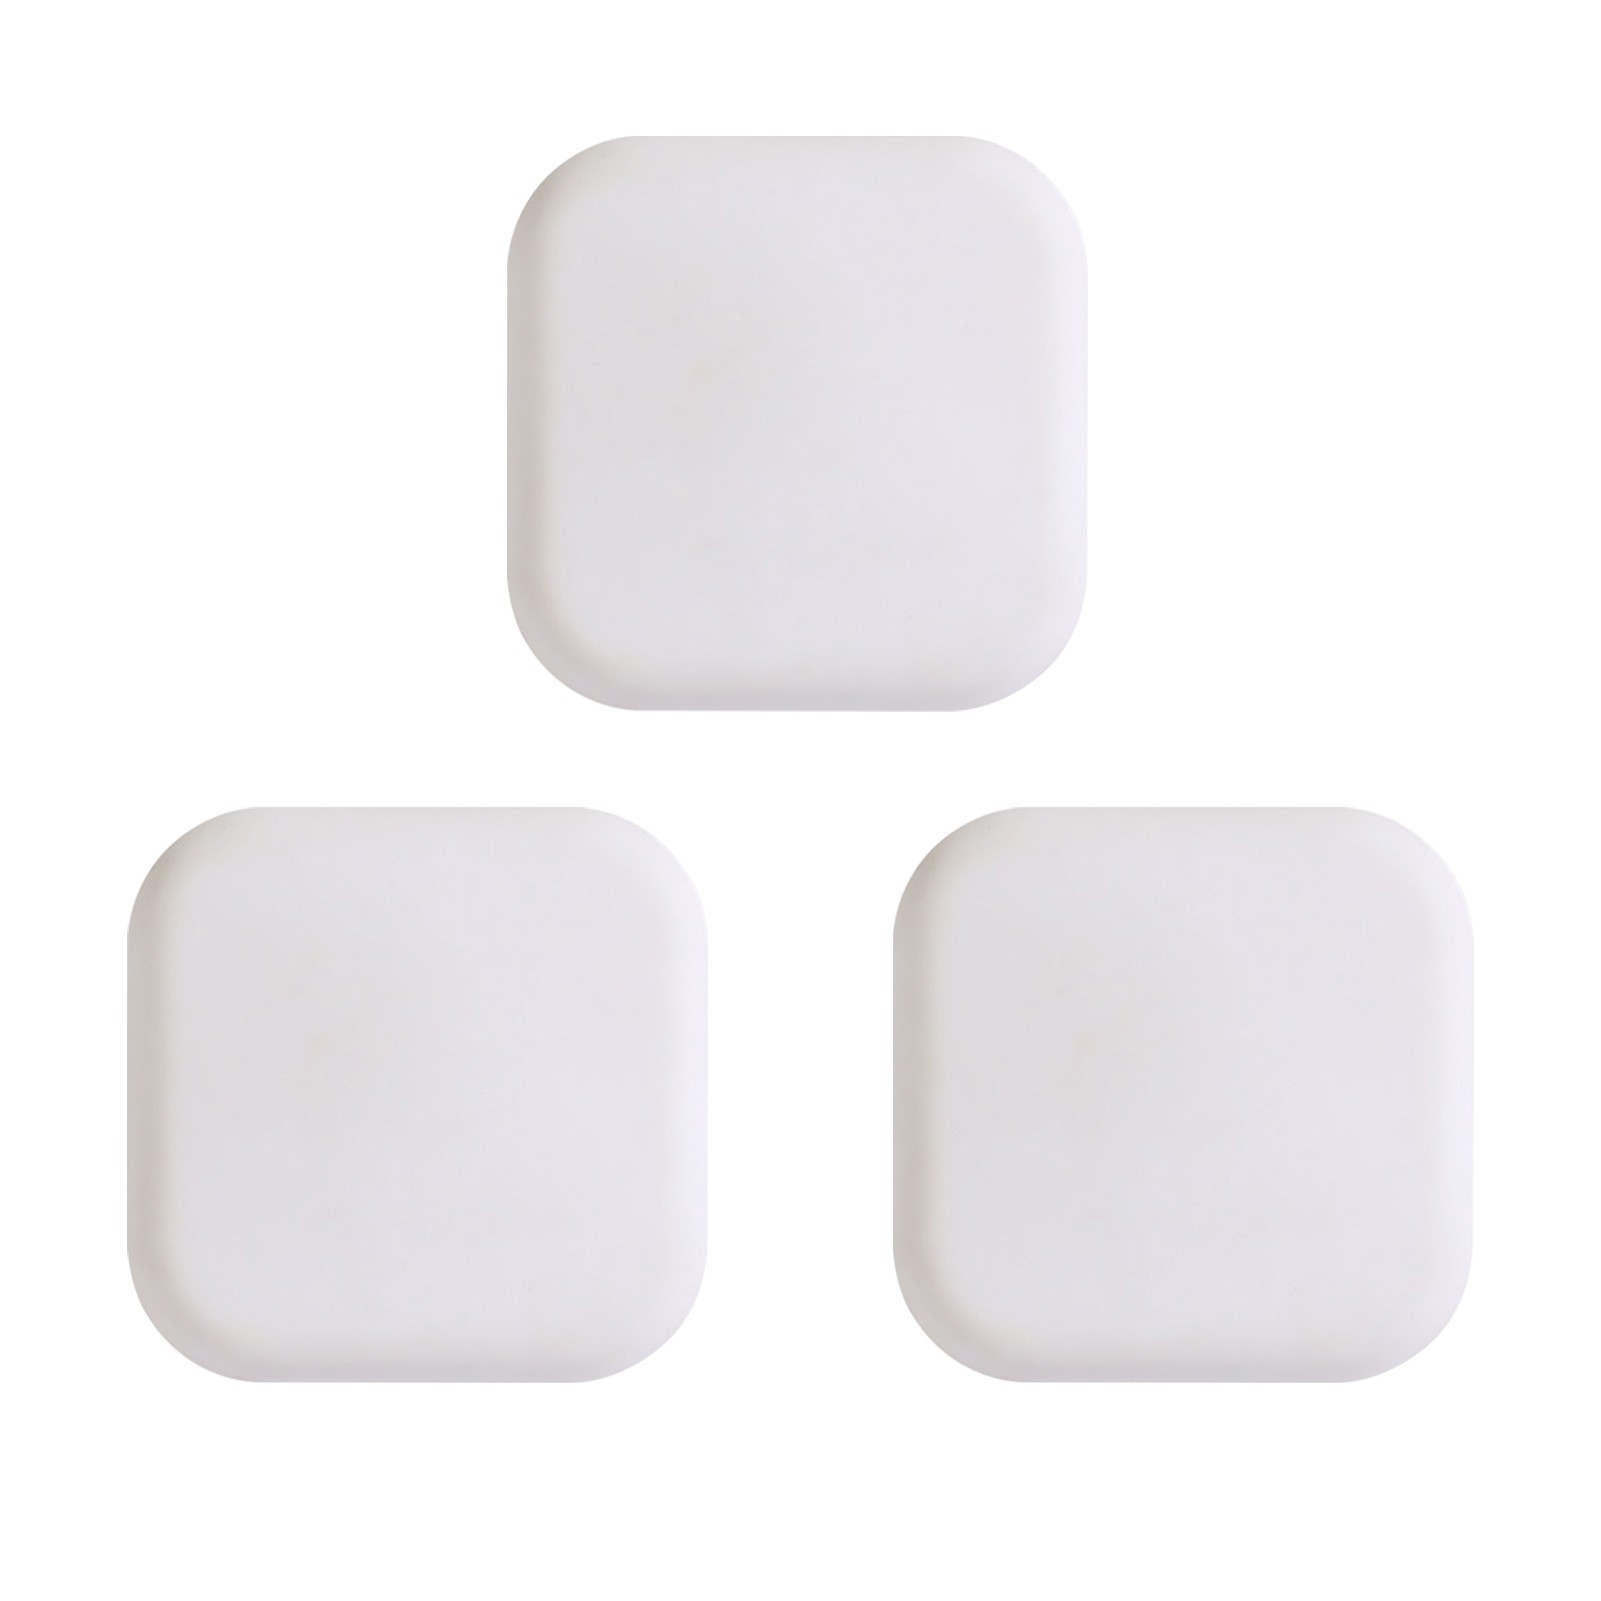 3pcs Bedroom Universal Mute Silicone Sticker Home Decor Protective Portable Anti Collision Door Stopper Punch Free Self-adhesive